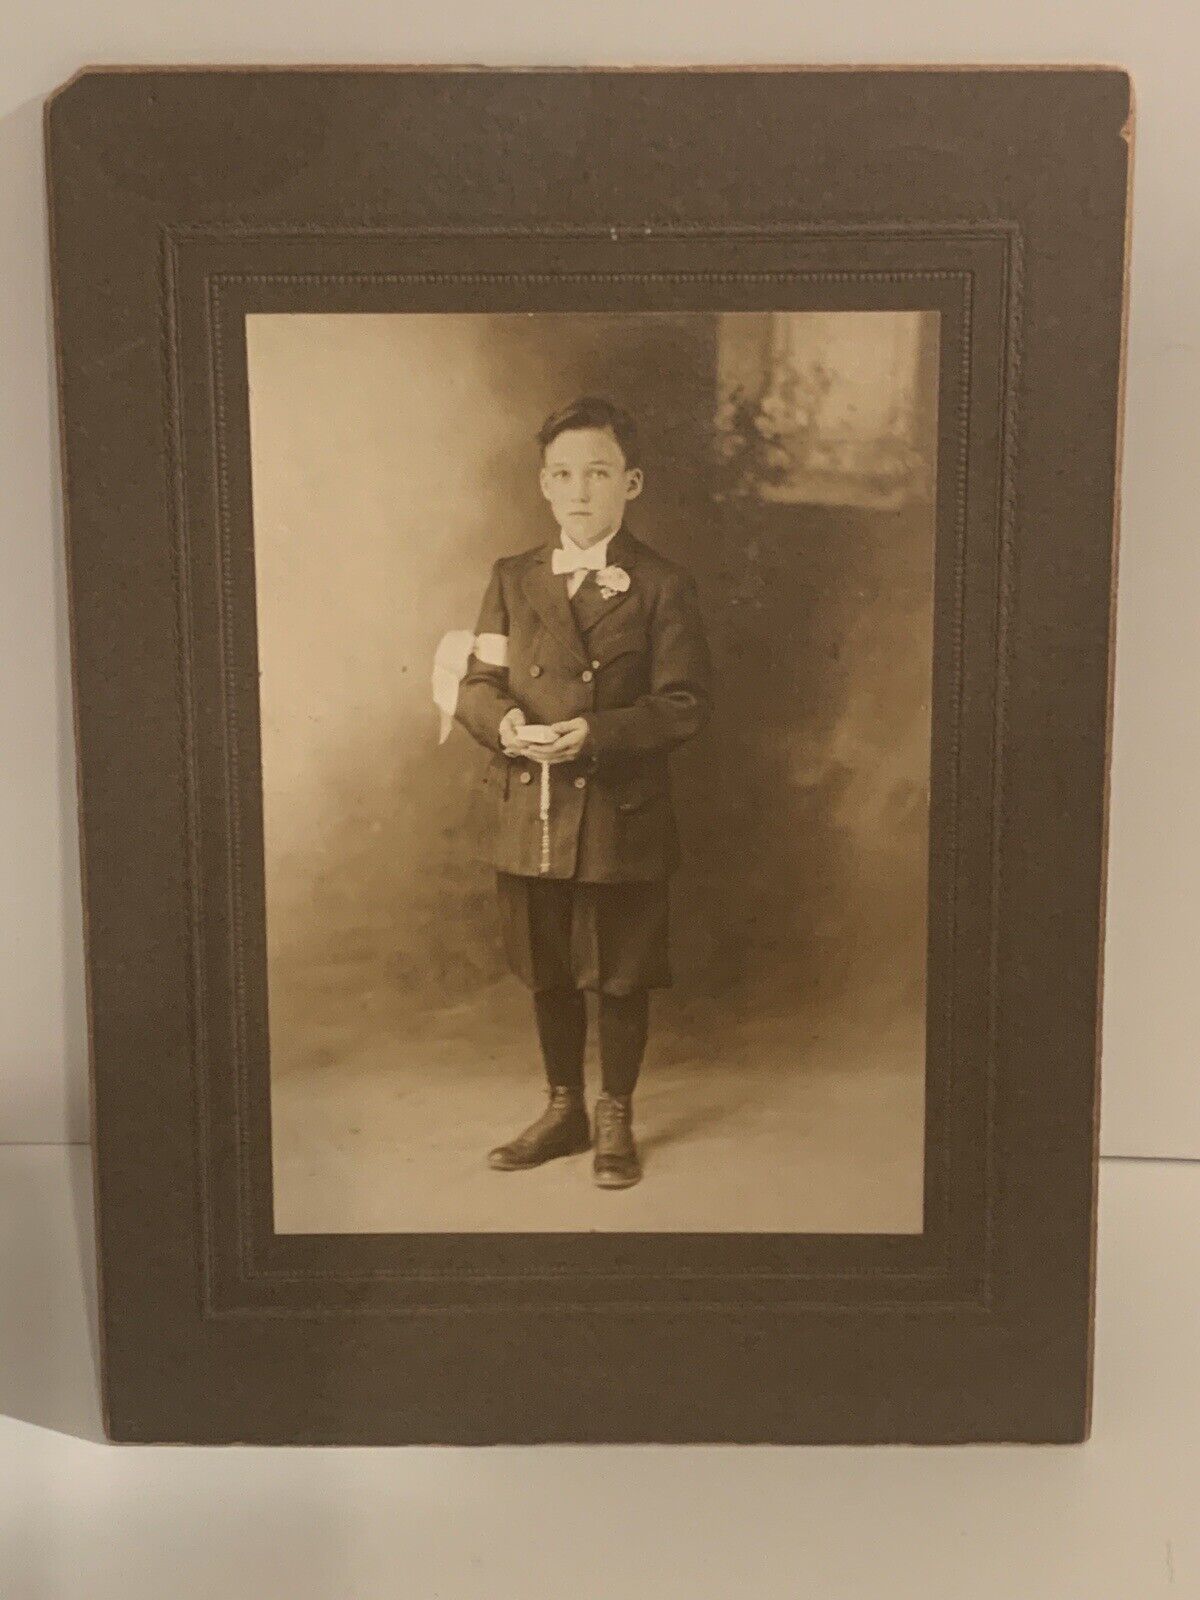 Antique Cabinet Card Young Boy Wearing Suit With Bow Tie 6” x 8”